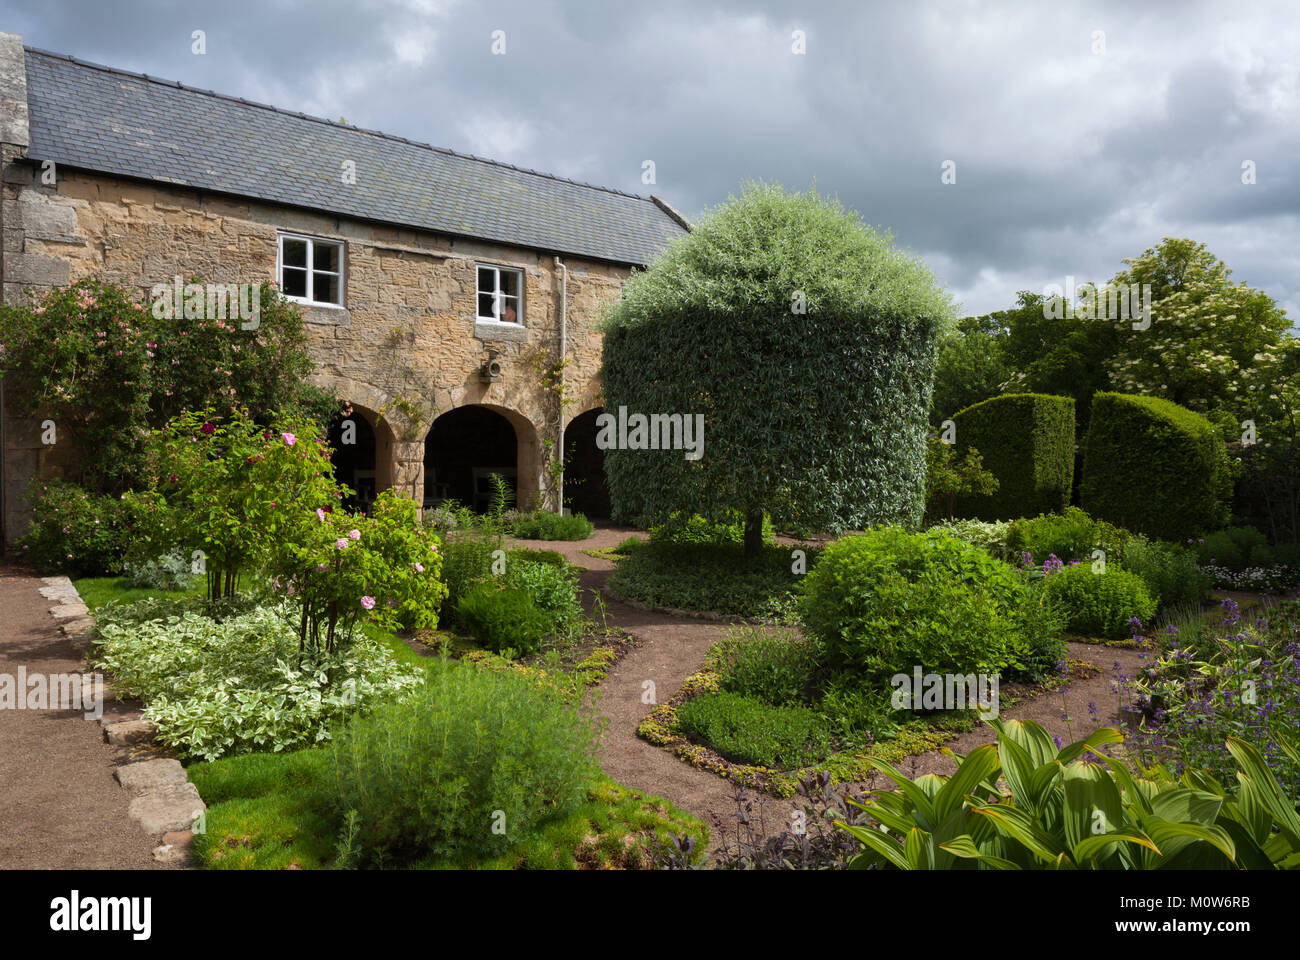 In the physic garden with the weeping silver-leafed pear tree mid-way through its summer clipping and the three arches of the granary providing the ba Stock Photo